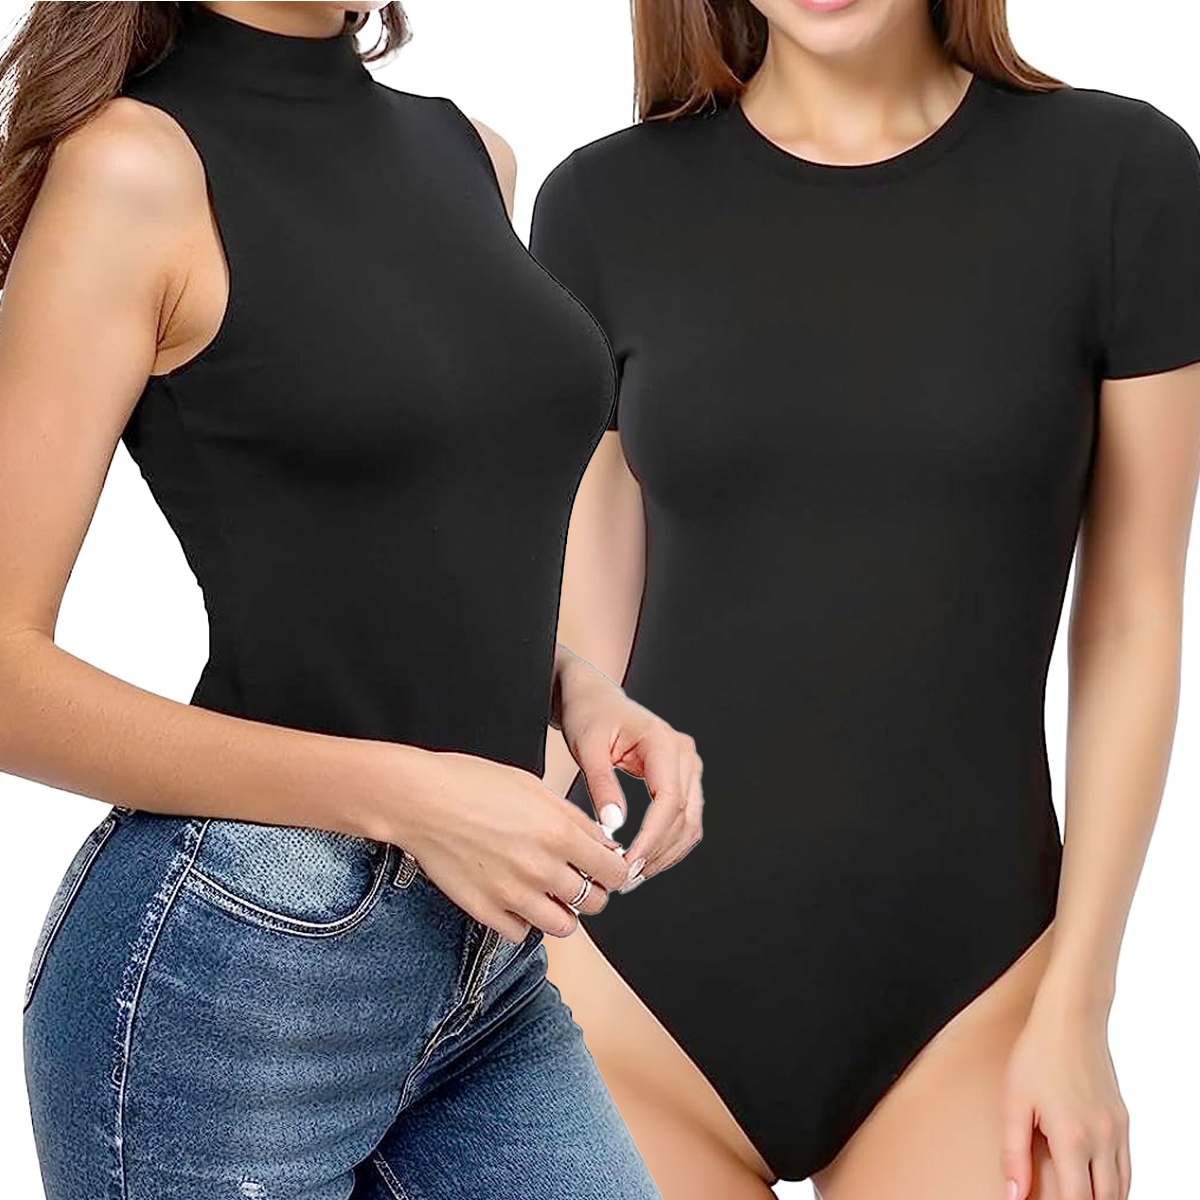 The Bodysuits Everyone Loves Are All Under $20 for Prime Day